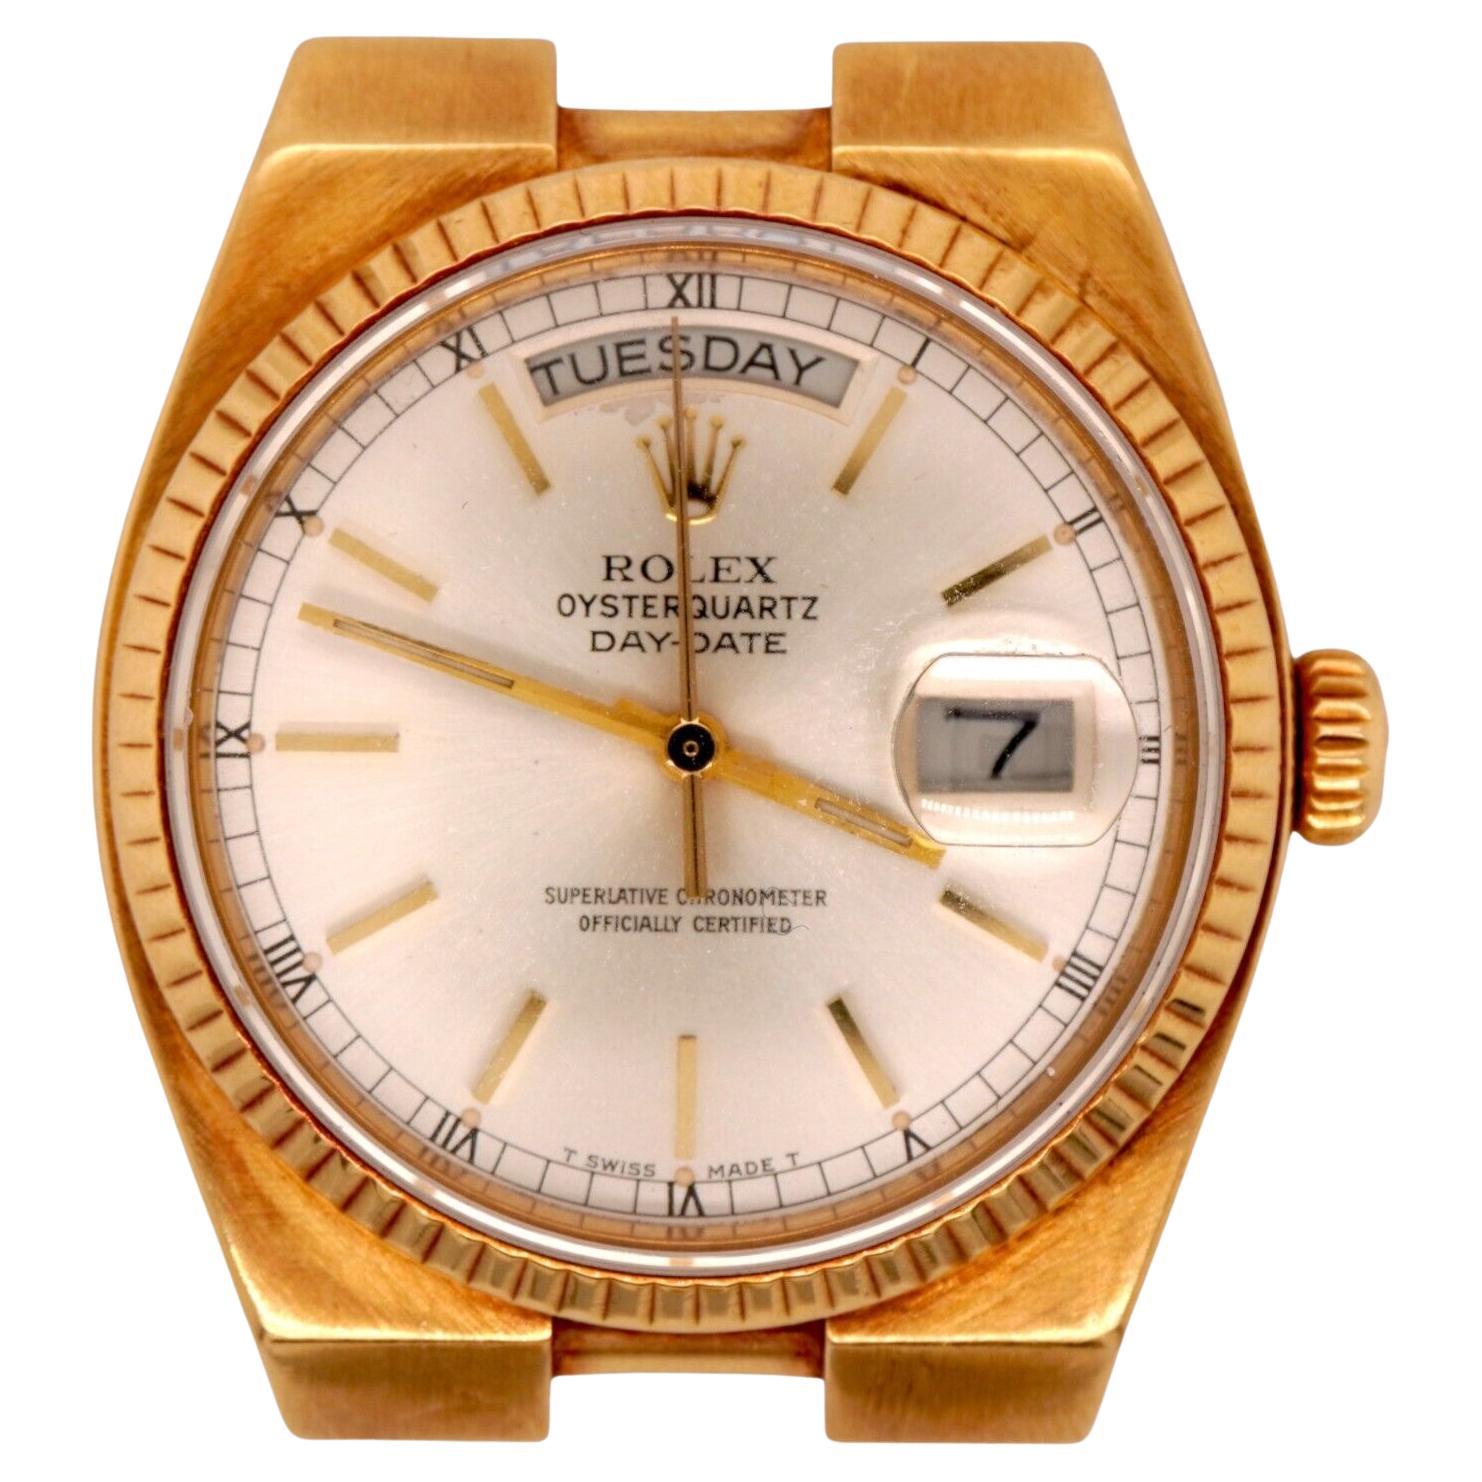 Rolex OysterQuartz Day-Date 36mm 18k Yellow Gold Mens Watch Silver Dial 19018 For Sale